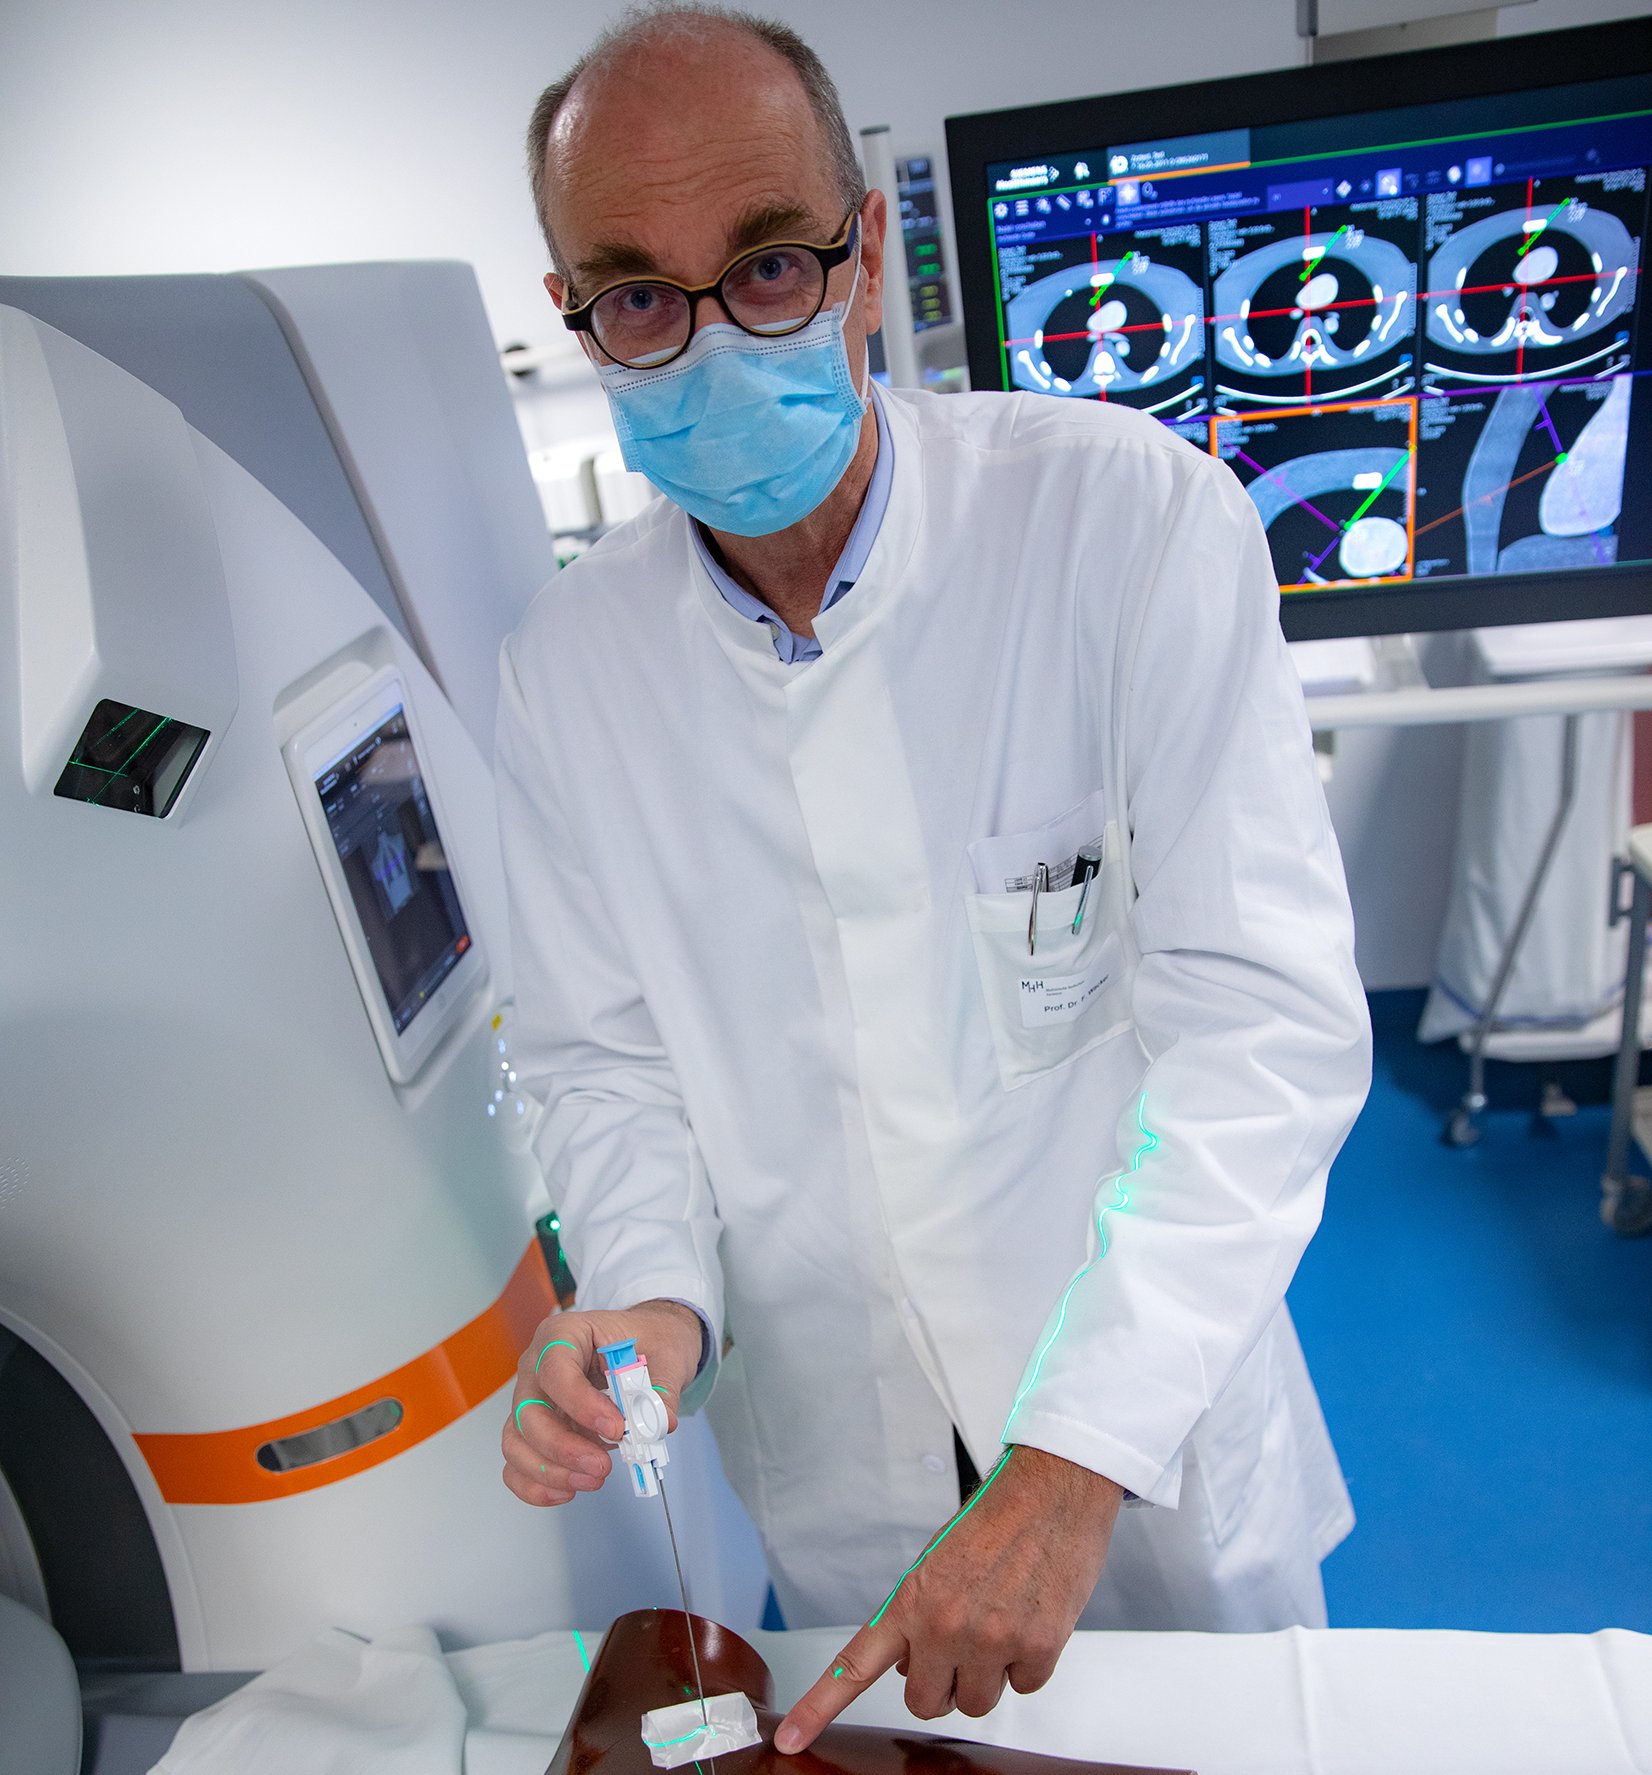 The picture shows Professor Wacker at the new CT machine with laser navigation. He uses an artificial model to demonstrate how green laser beams mark exactly the right puncture site for the needle.